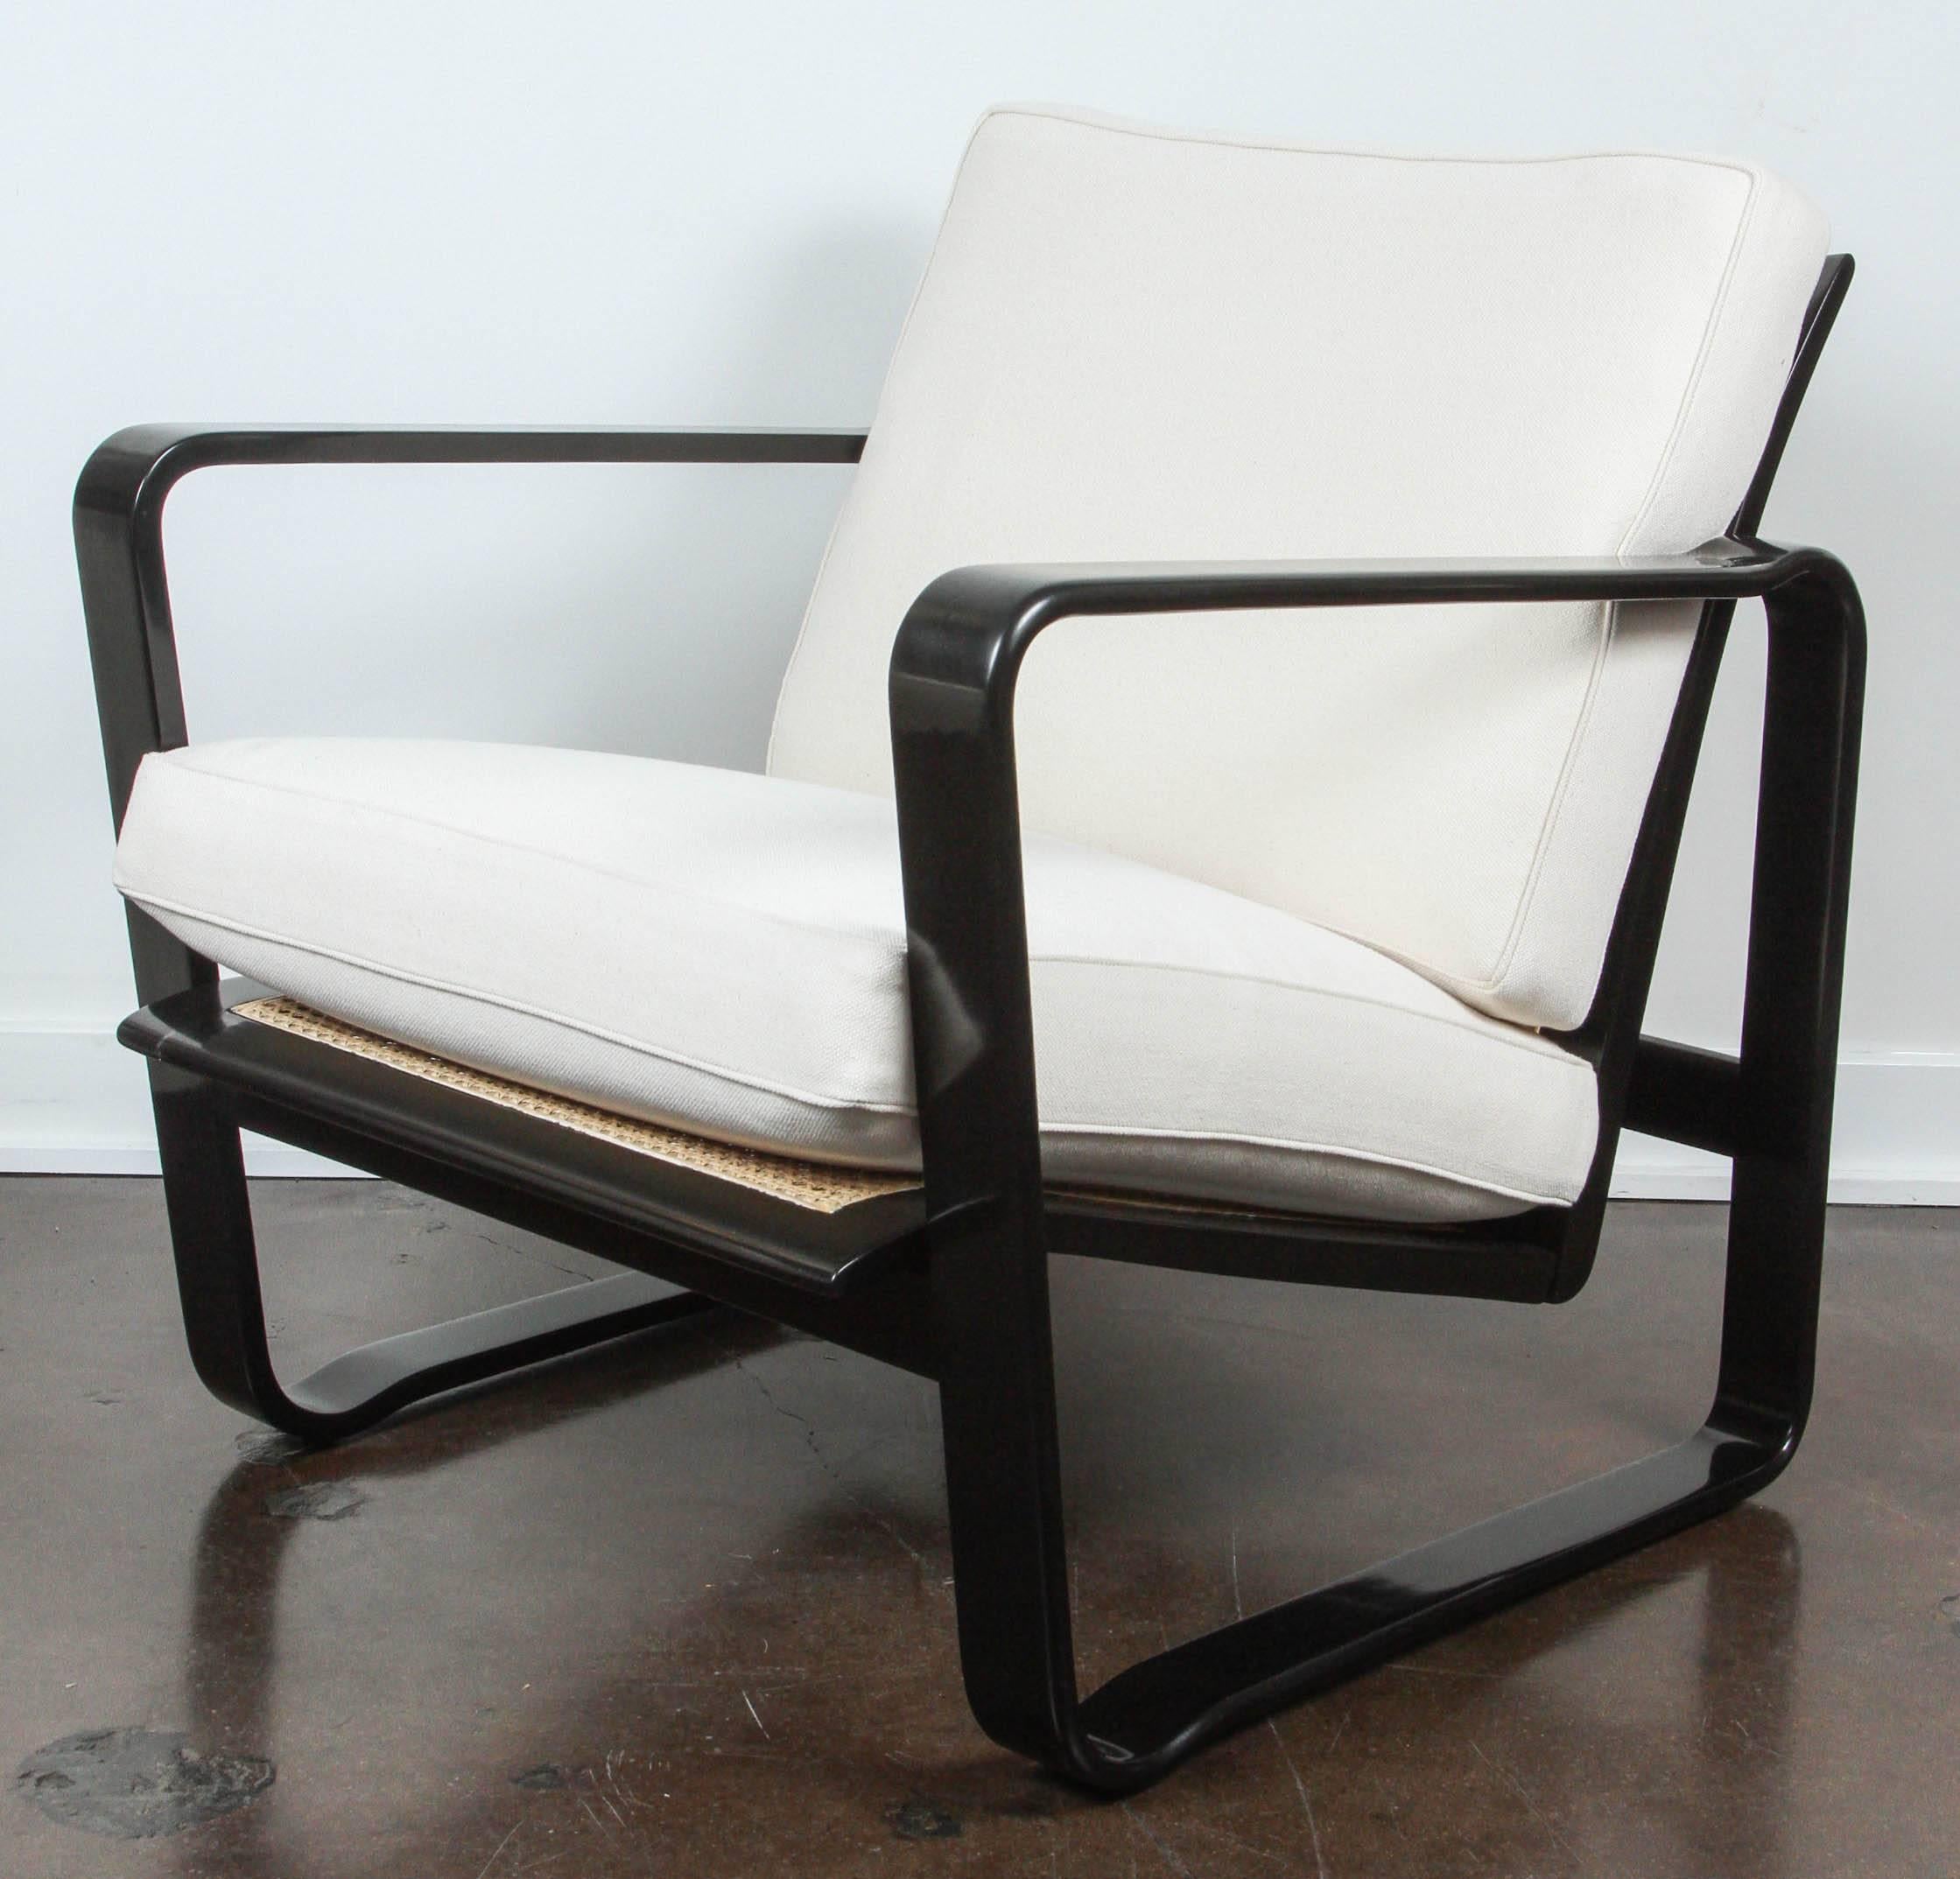 American Pair of Adjustable Modern Morris Chairs by Edward Wormley, Model No. 4731